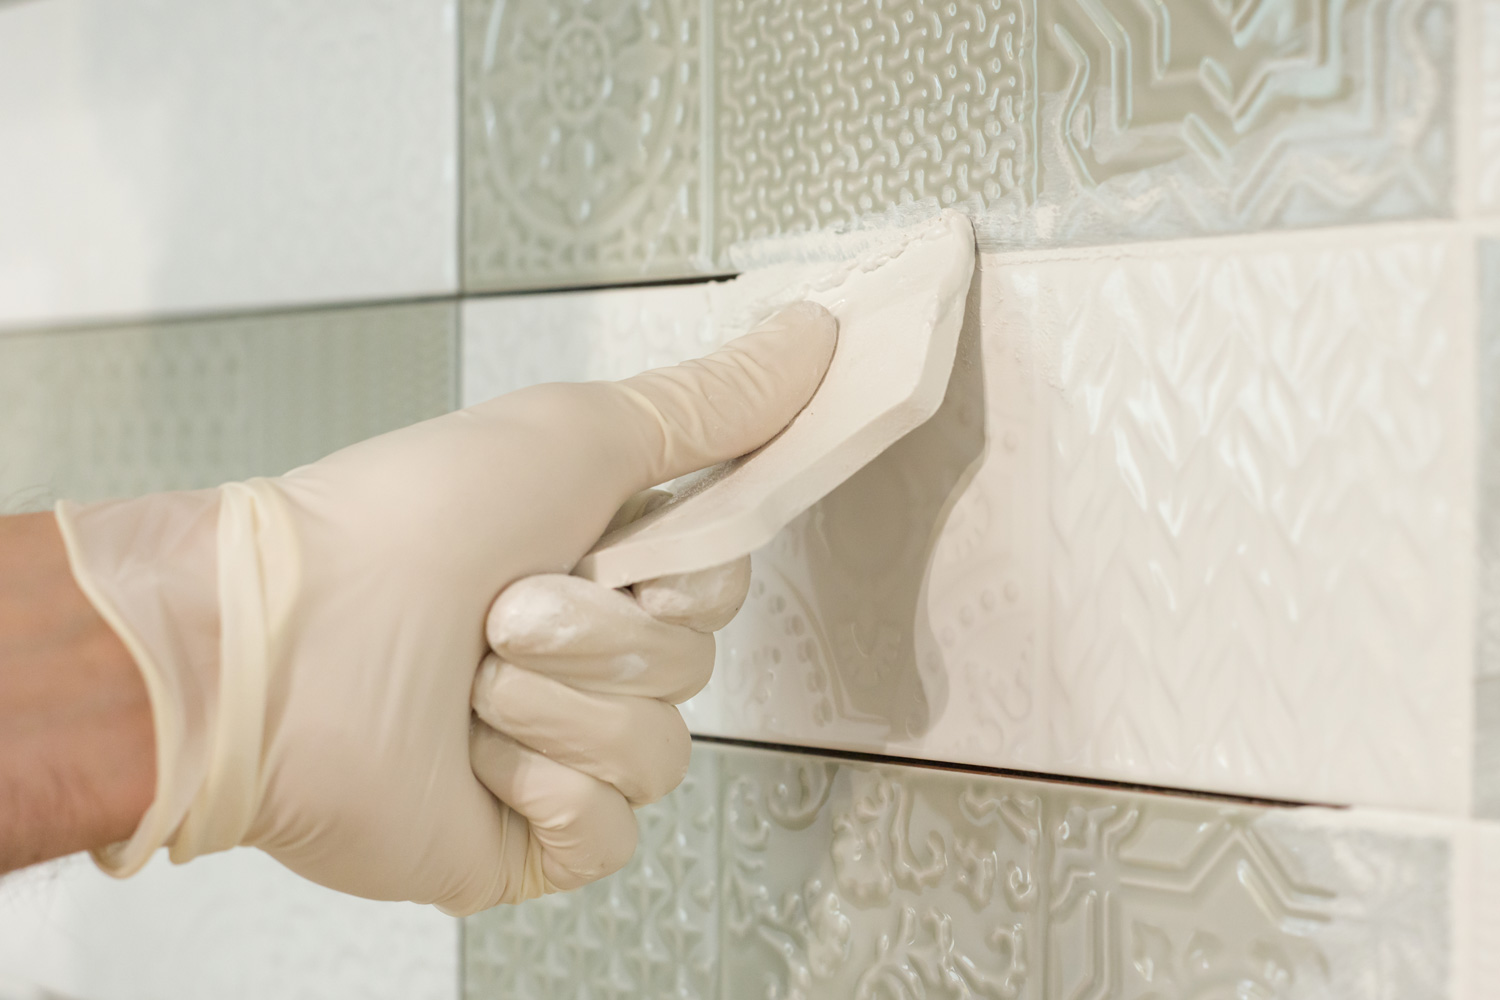 Closeup of tiler hand rubbing tile, Installing and grouting decorative finishes in environments with an high aesthetic value. Two-component, decorative, acid resistant epoxy grout.